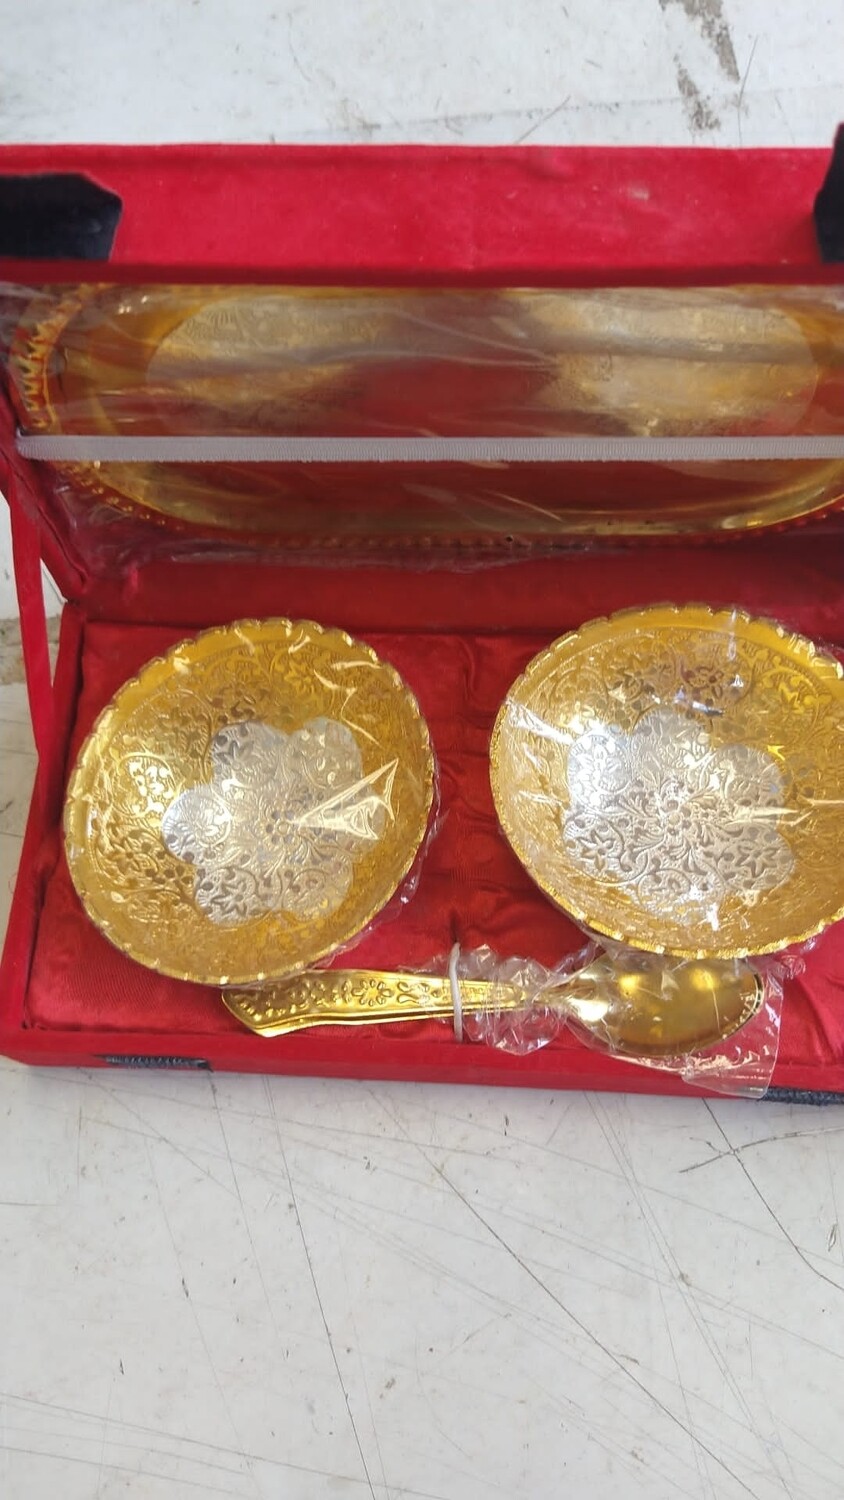 GOLD PLATED GIFT SET 2 BOWL IN FENCY BOX.(2 KATORI, 2 SPOON,1TRAY.